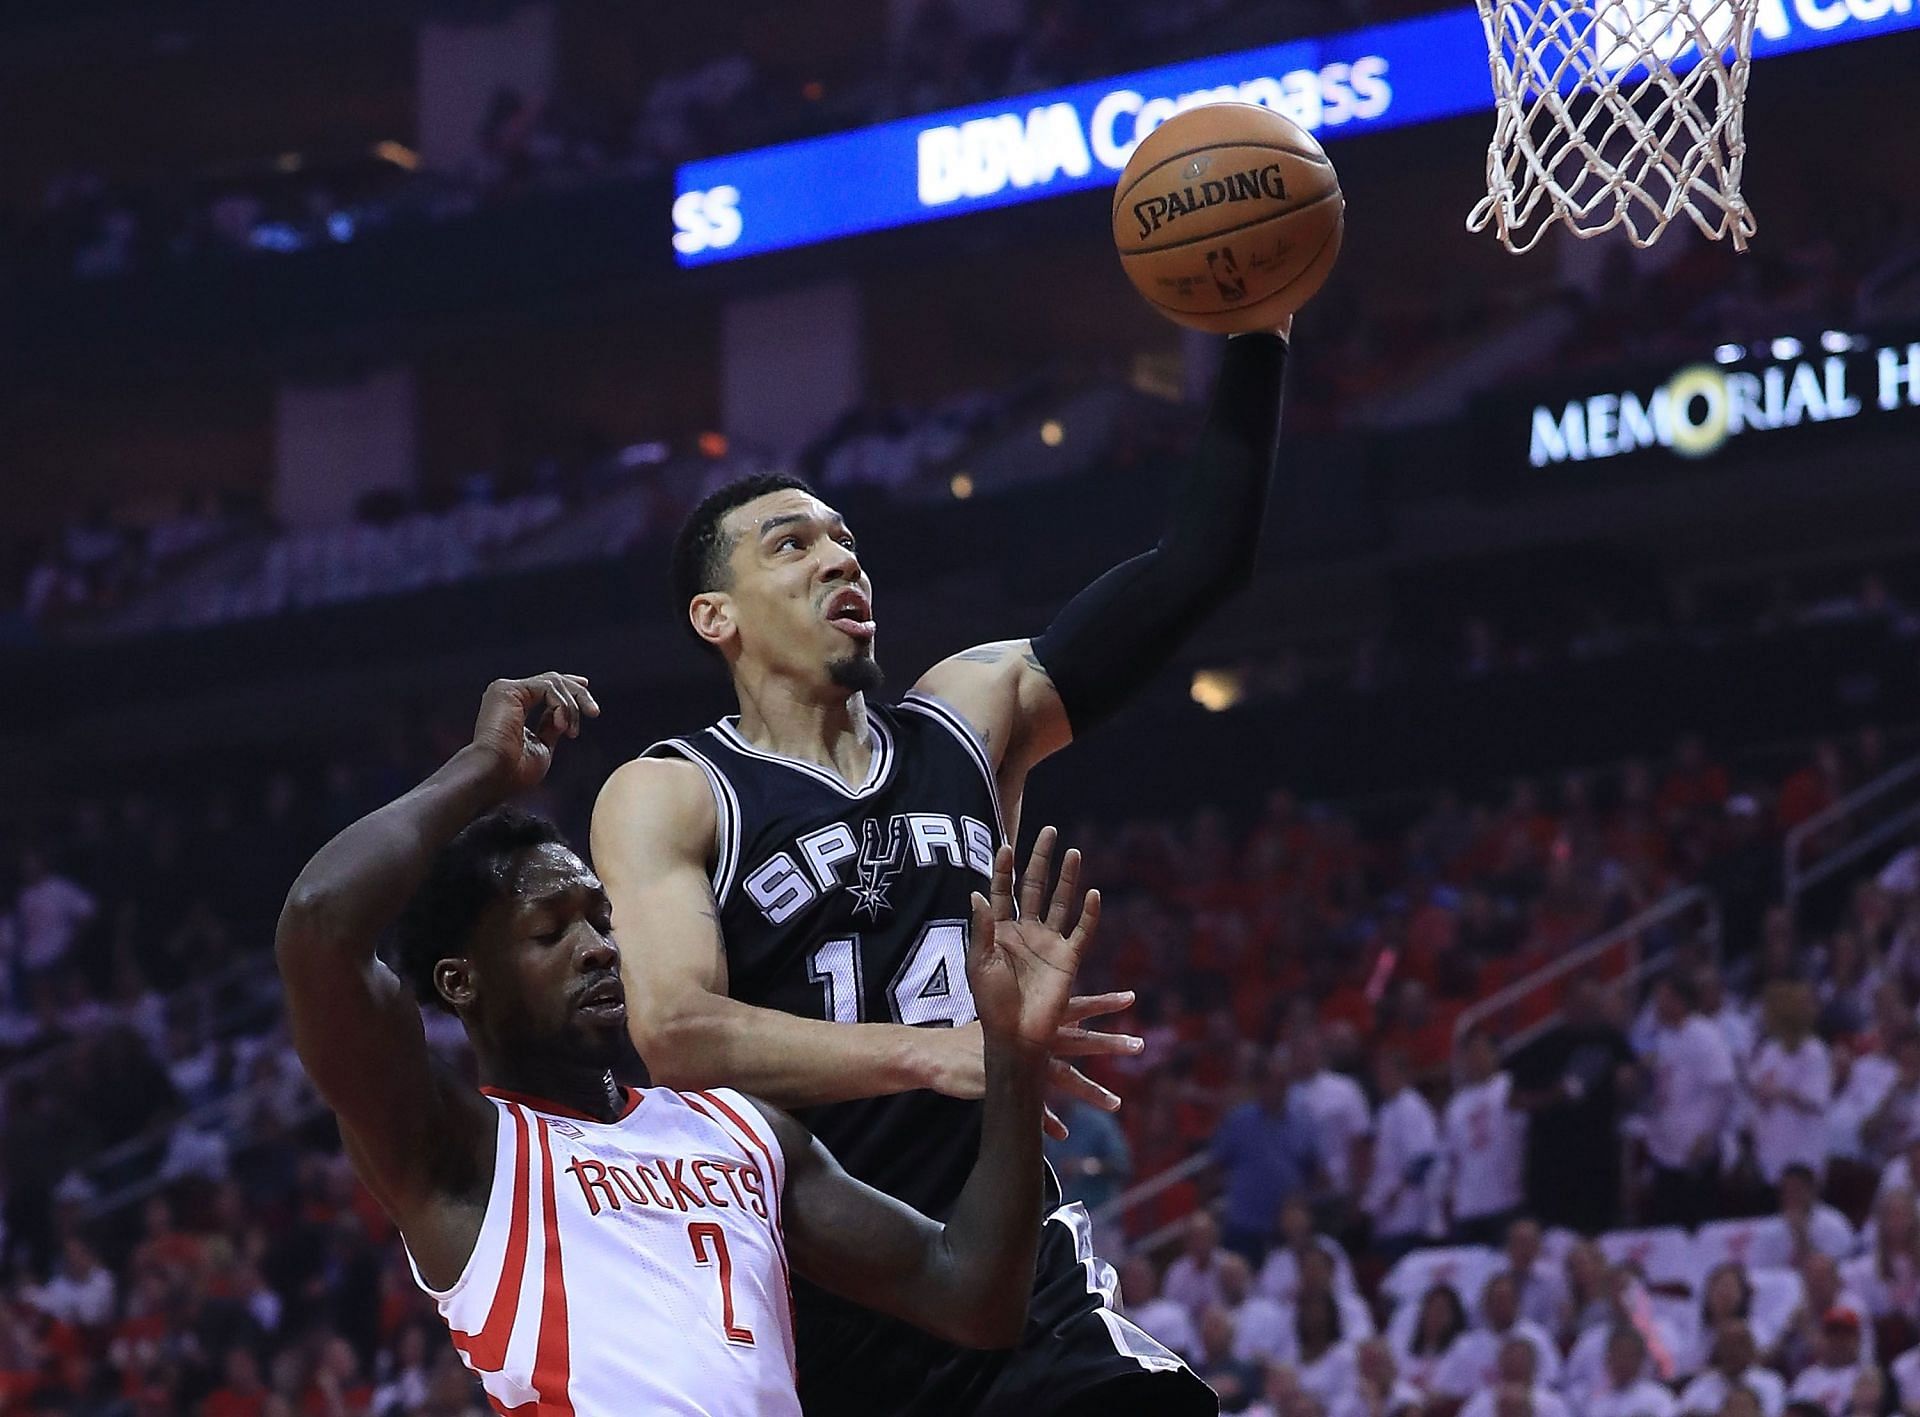 Danny Green of the San Antonio Spurs dunks against Patrick Beverley of the Houston Rockets.